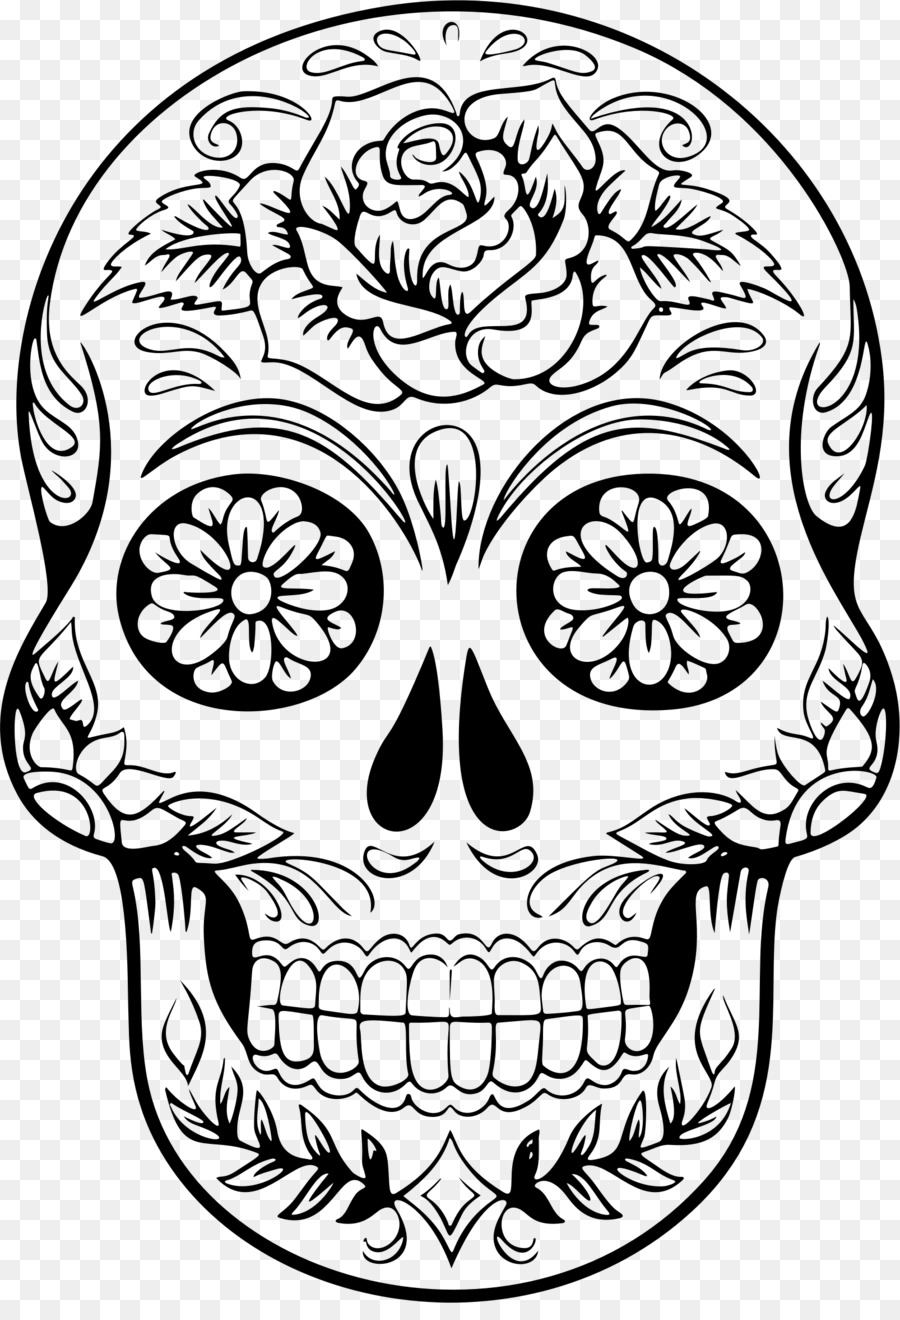 Day of the dead skull png download